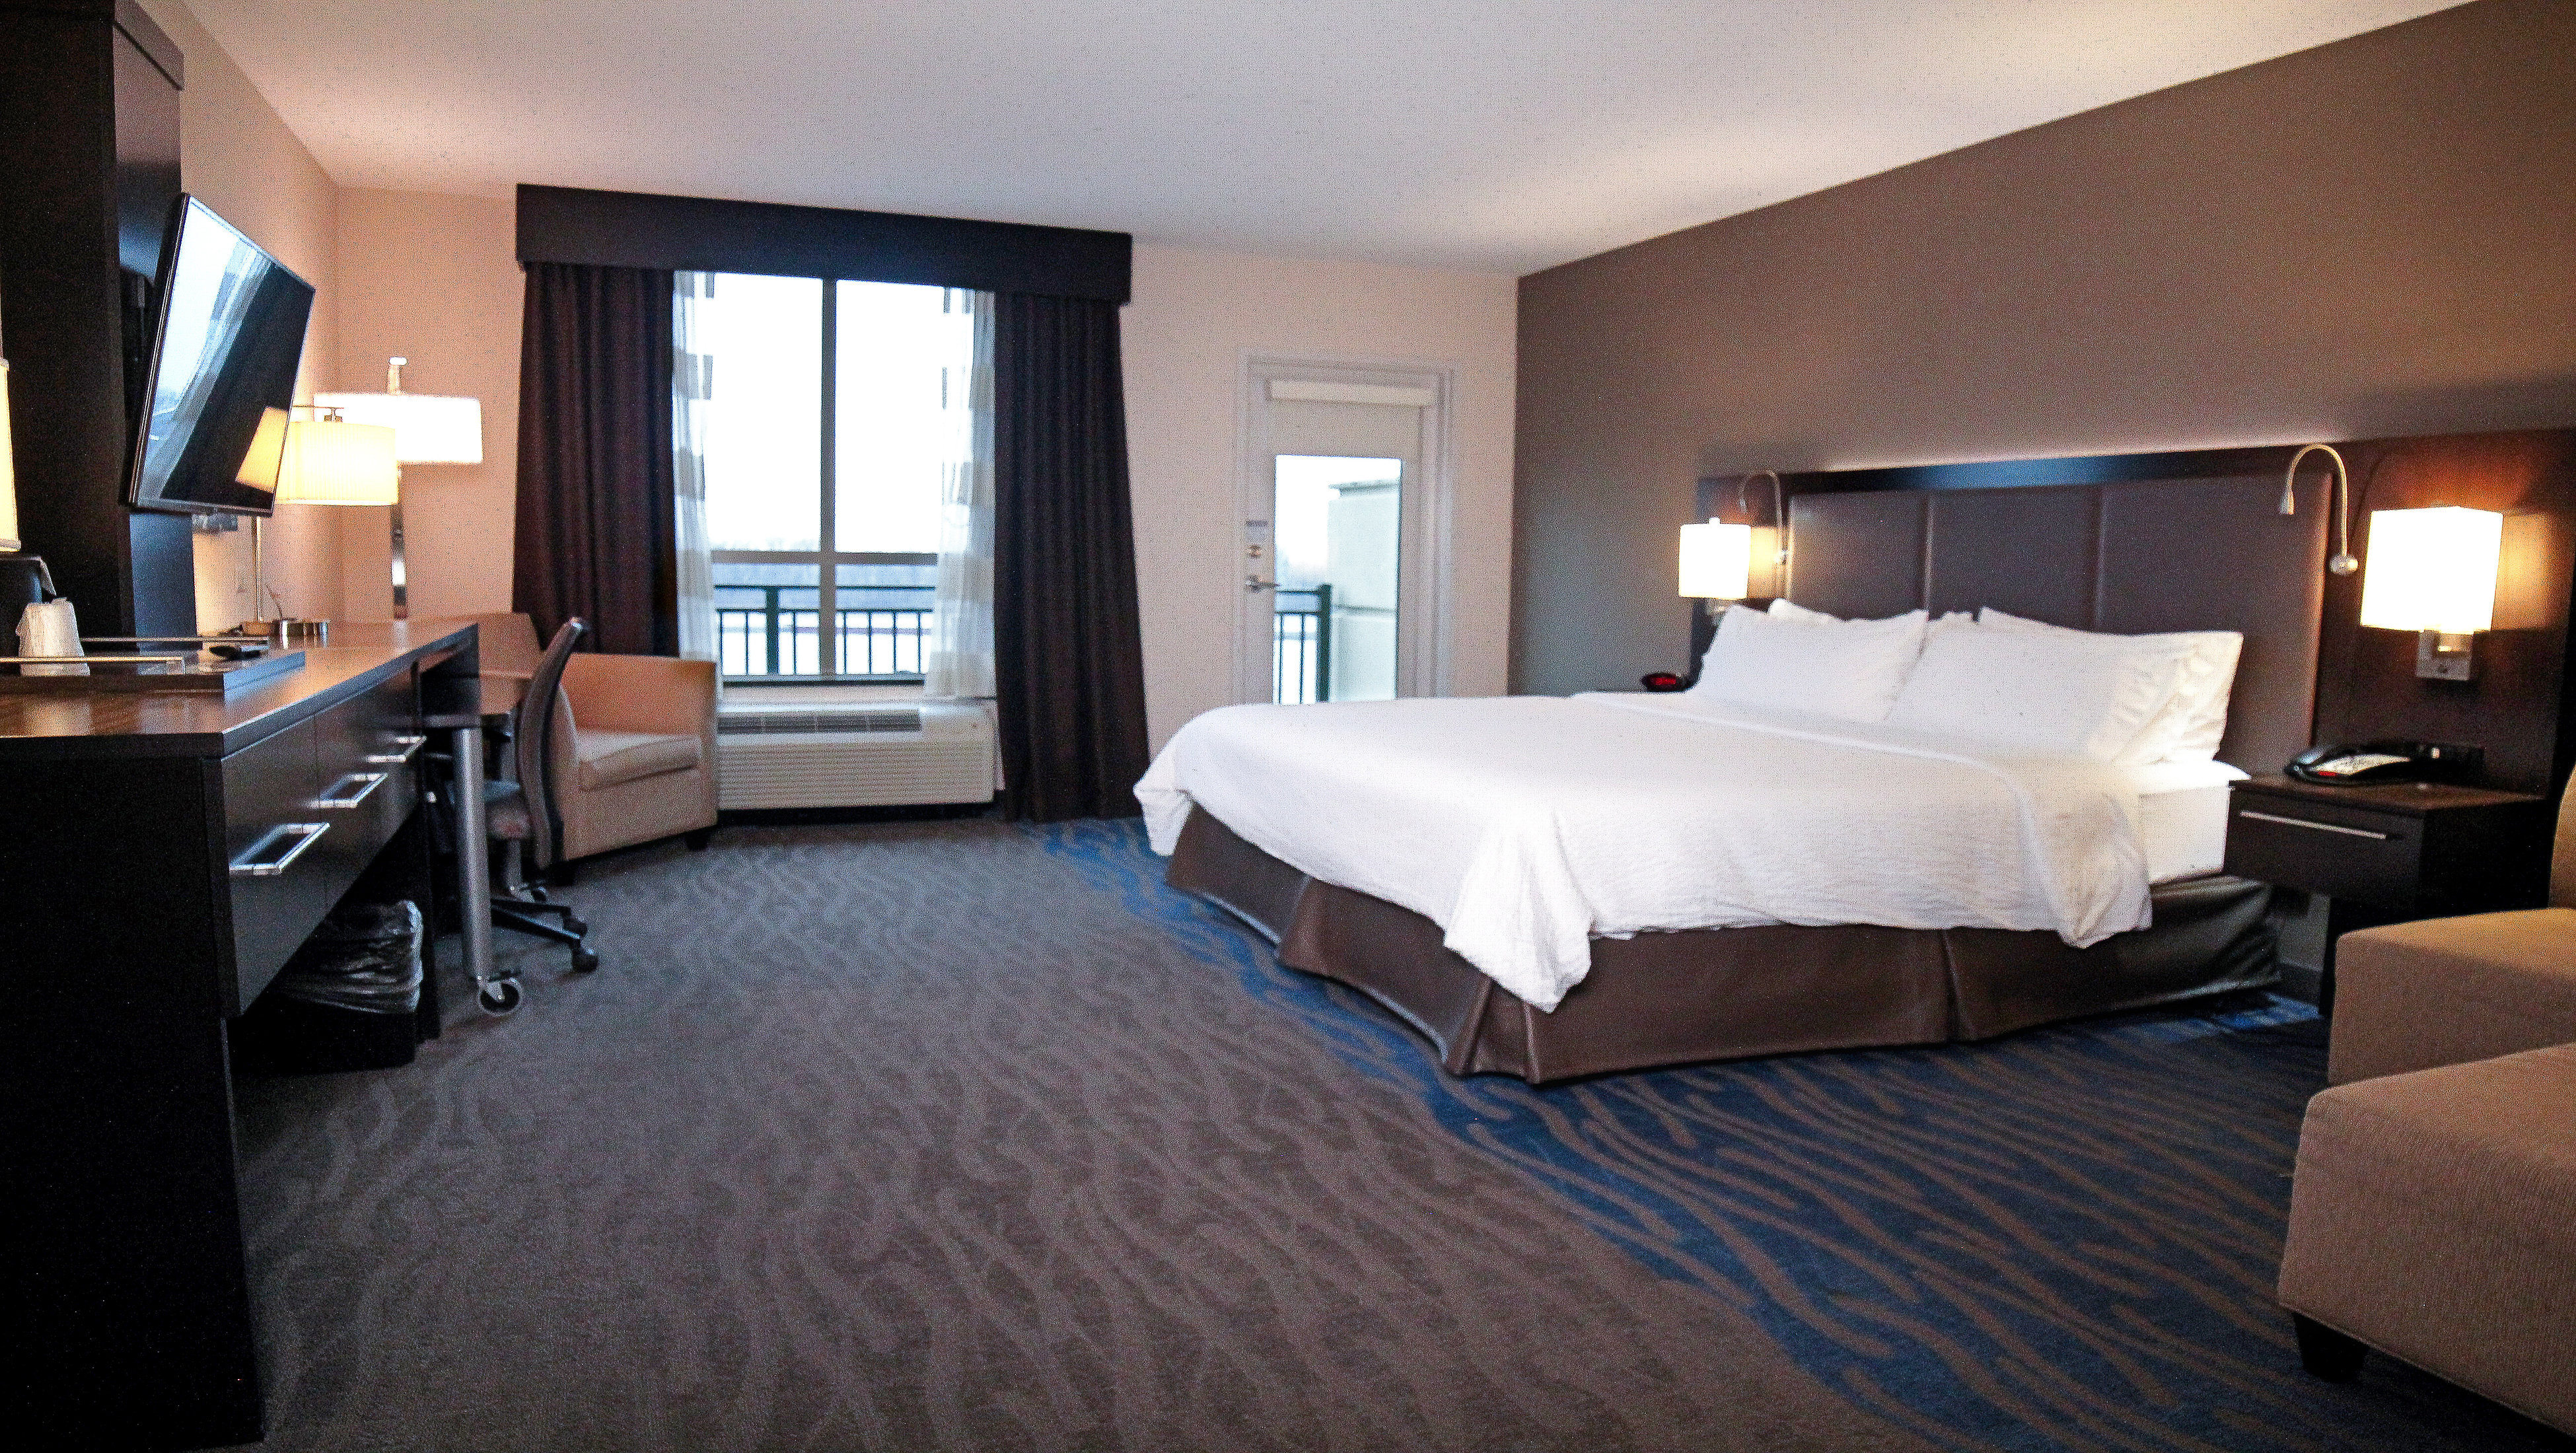 Our King Balcony room offers plenty of space for guests